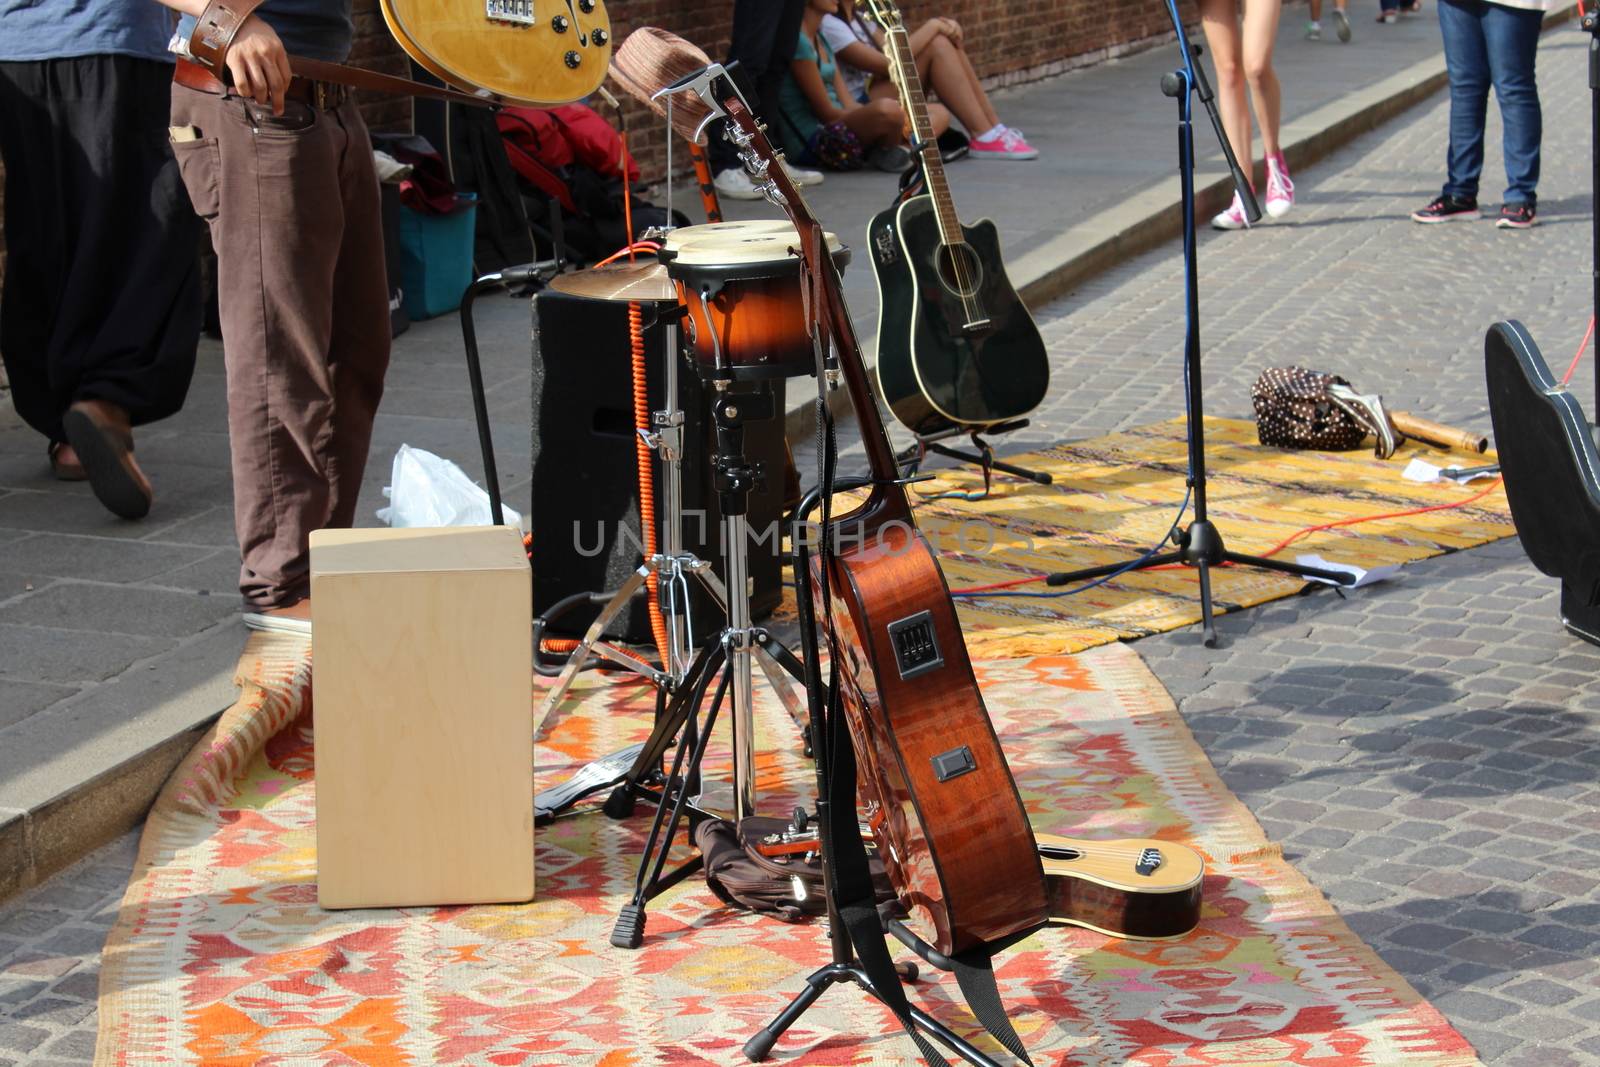 Artists perform in the street